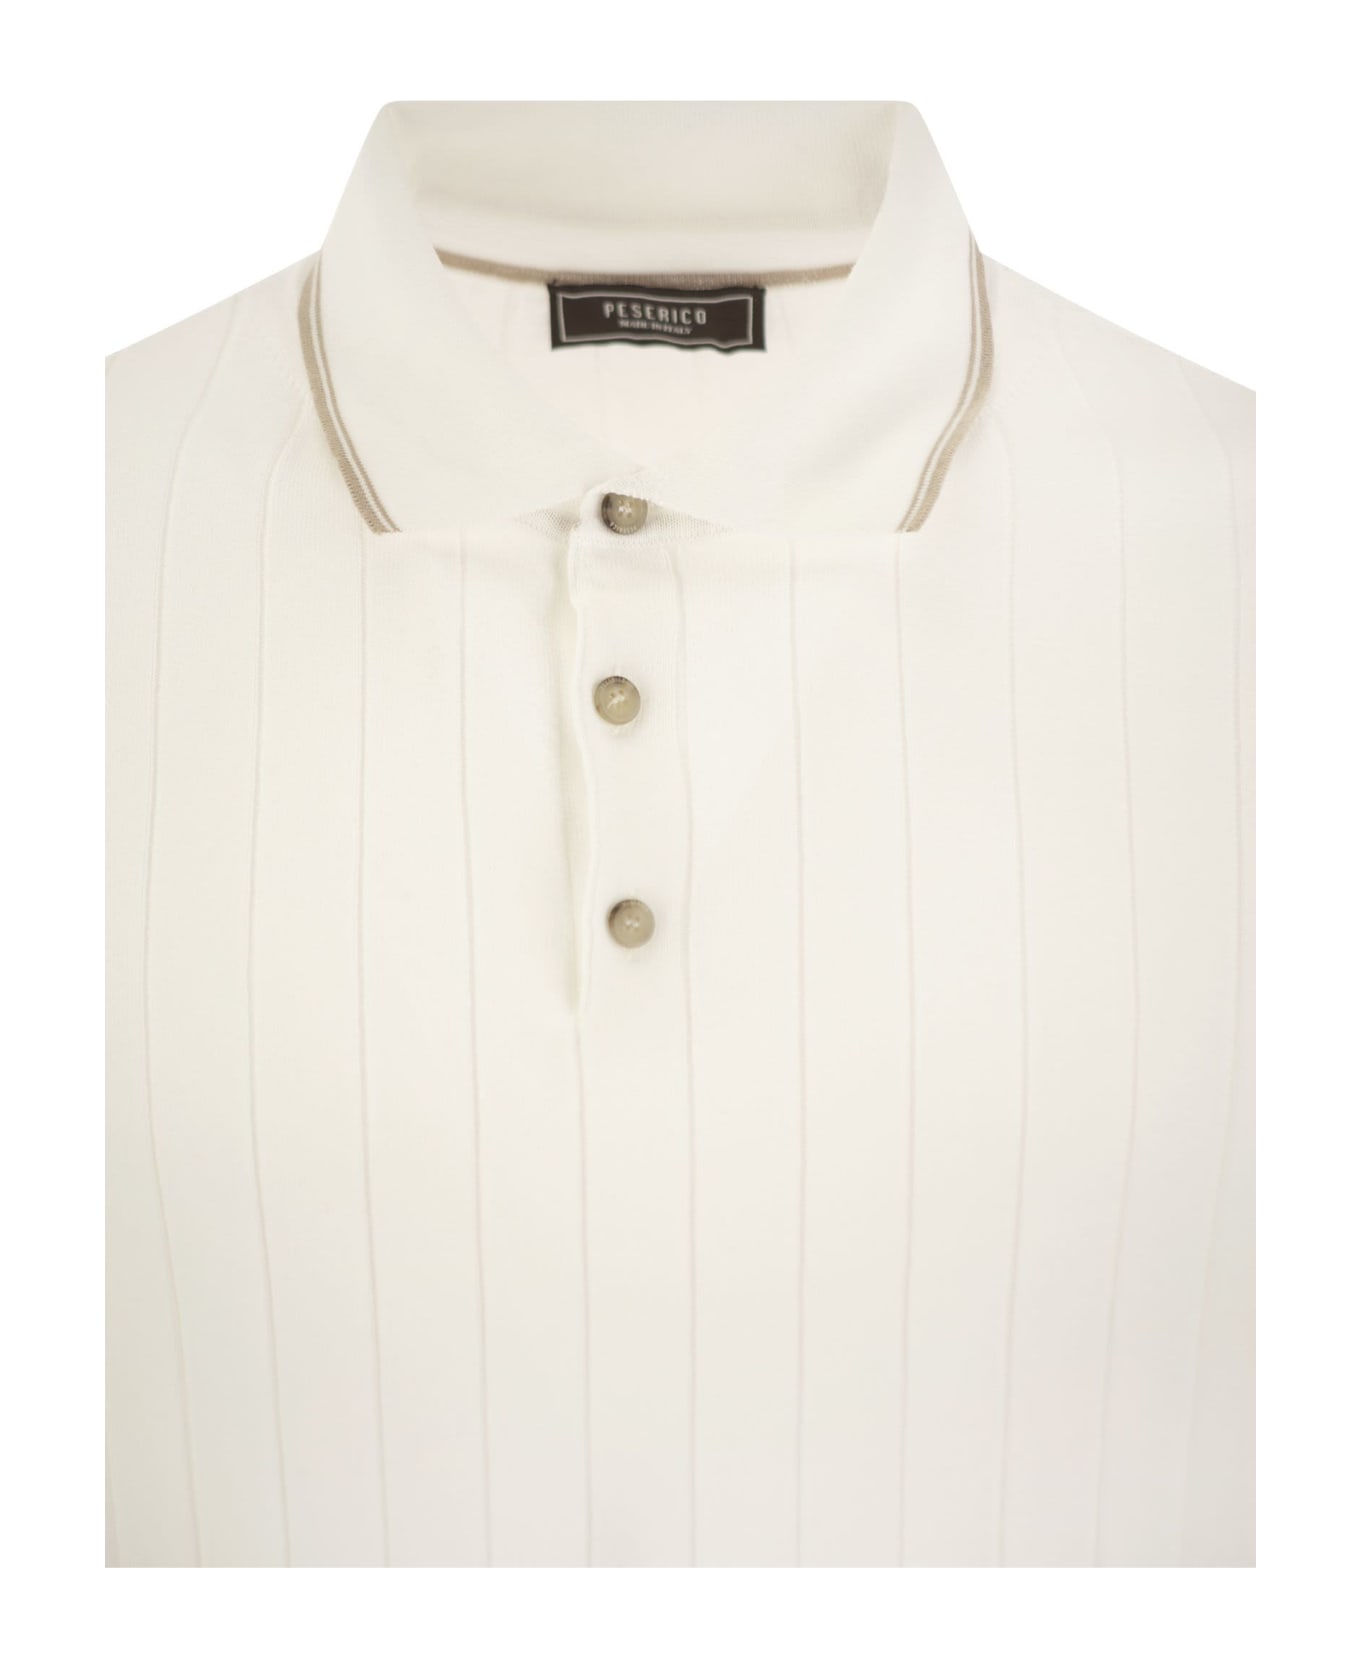 Peserico Polo Shirt In Pure Cotton Crepe Yarn With Flat Rib - White/beige ポロシャツ